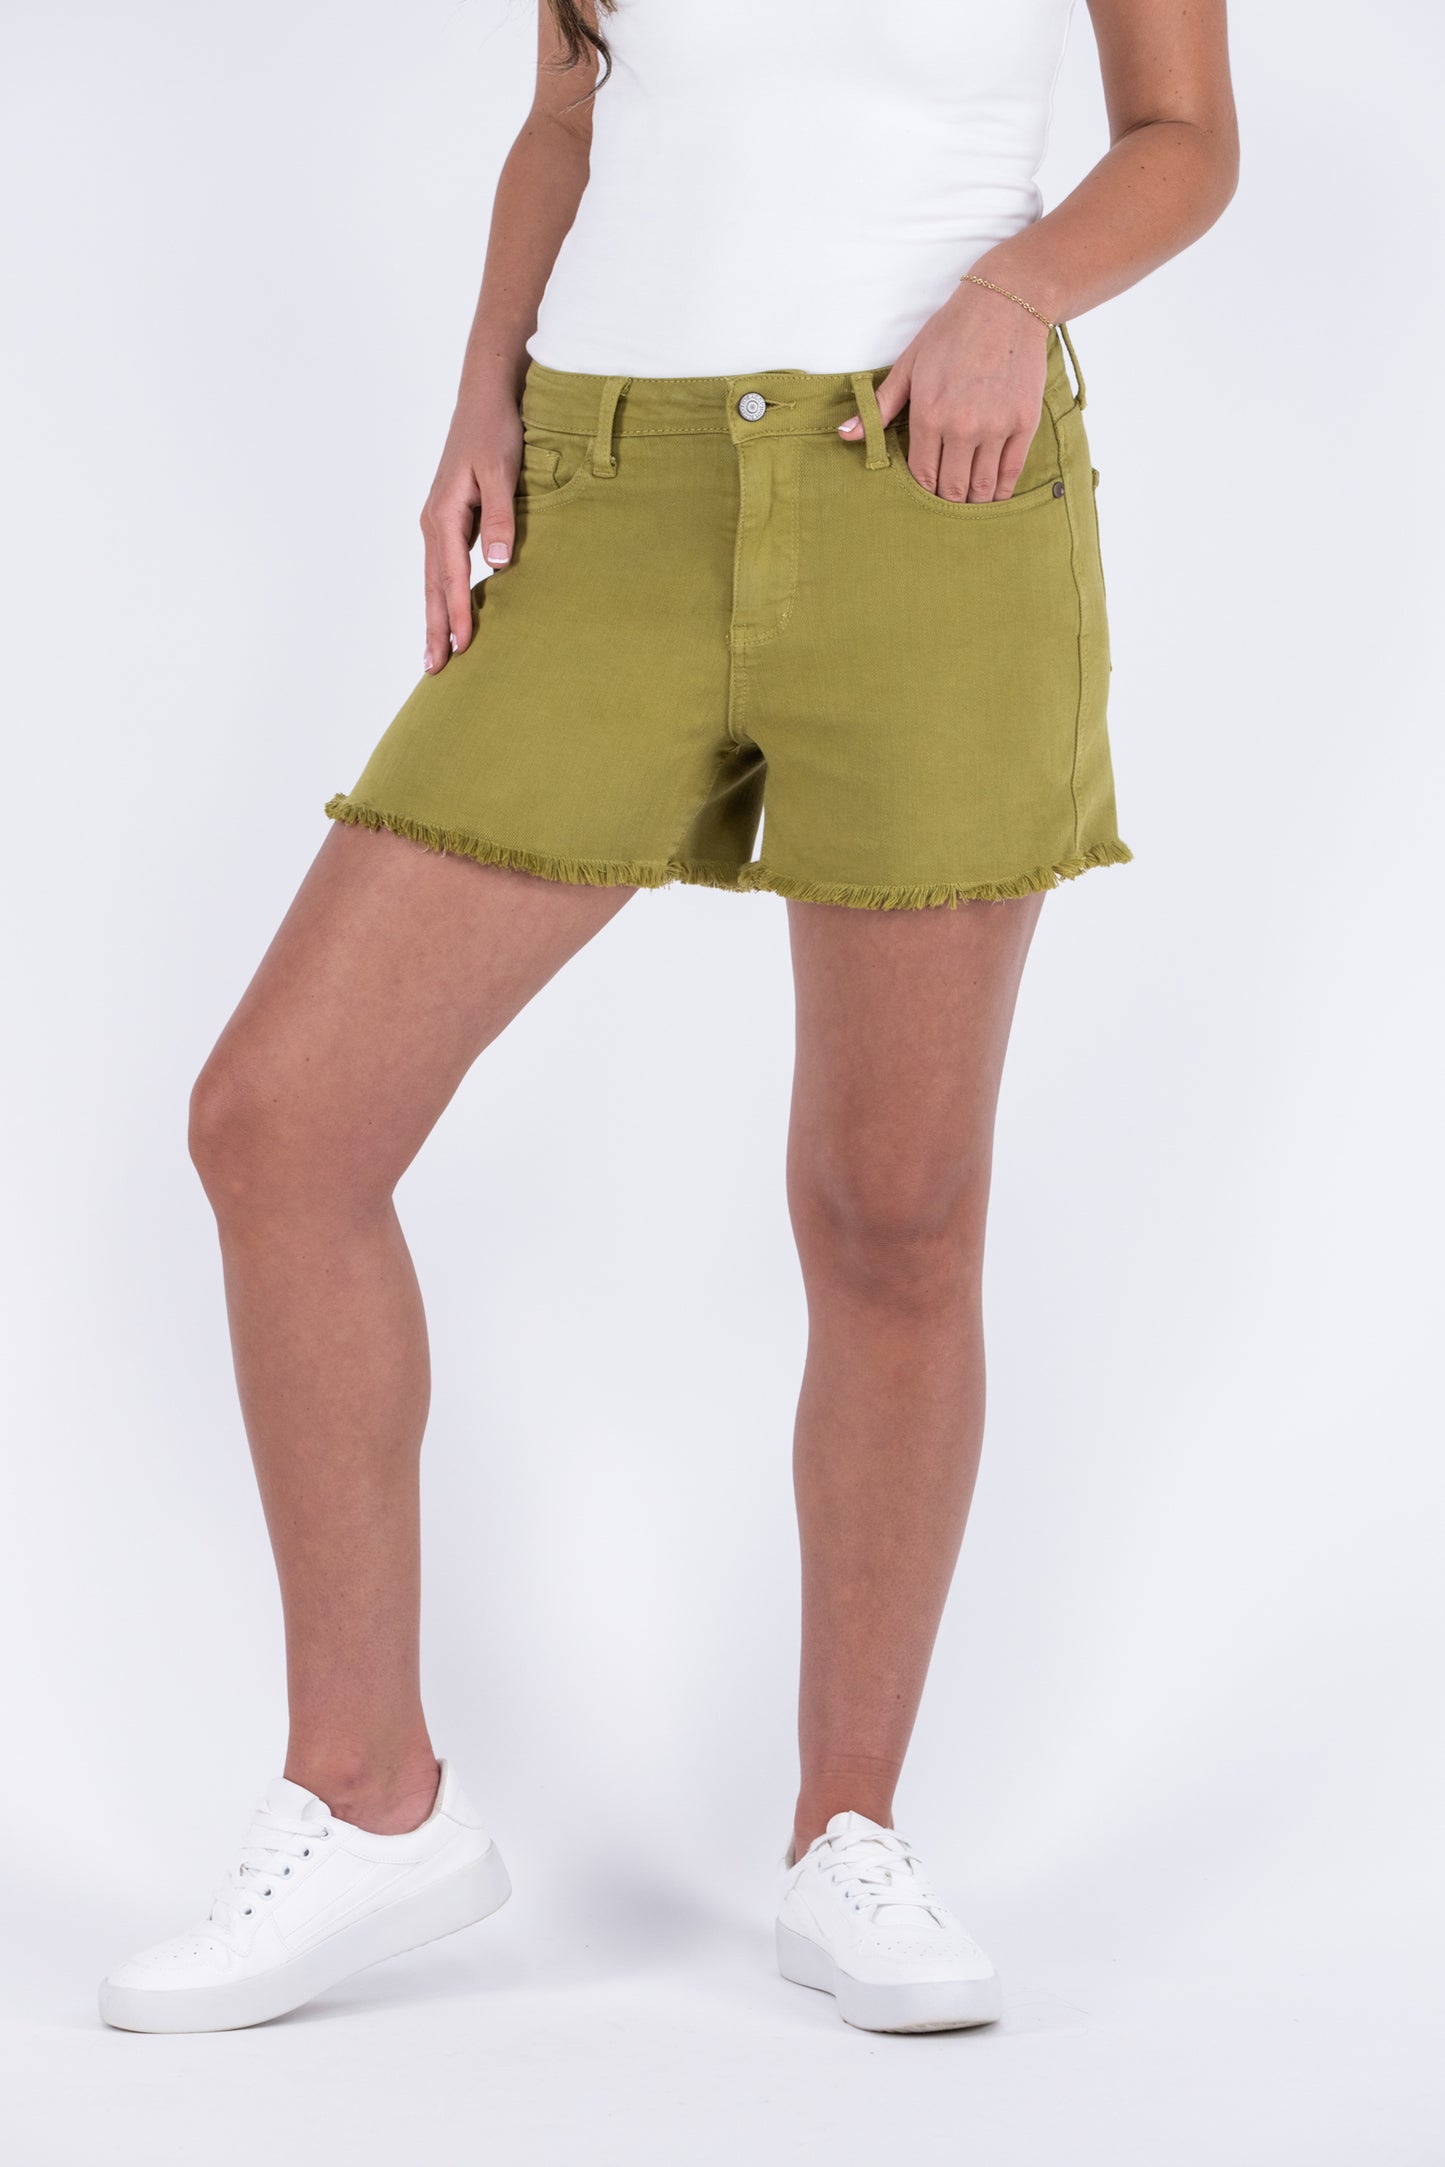 The Lizzie from Judy Blue: Mid-Rise Garment Dyed Fray Hem Denim Shorts